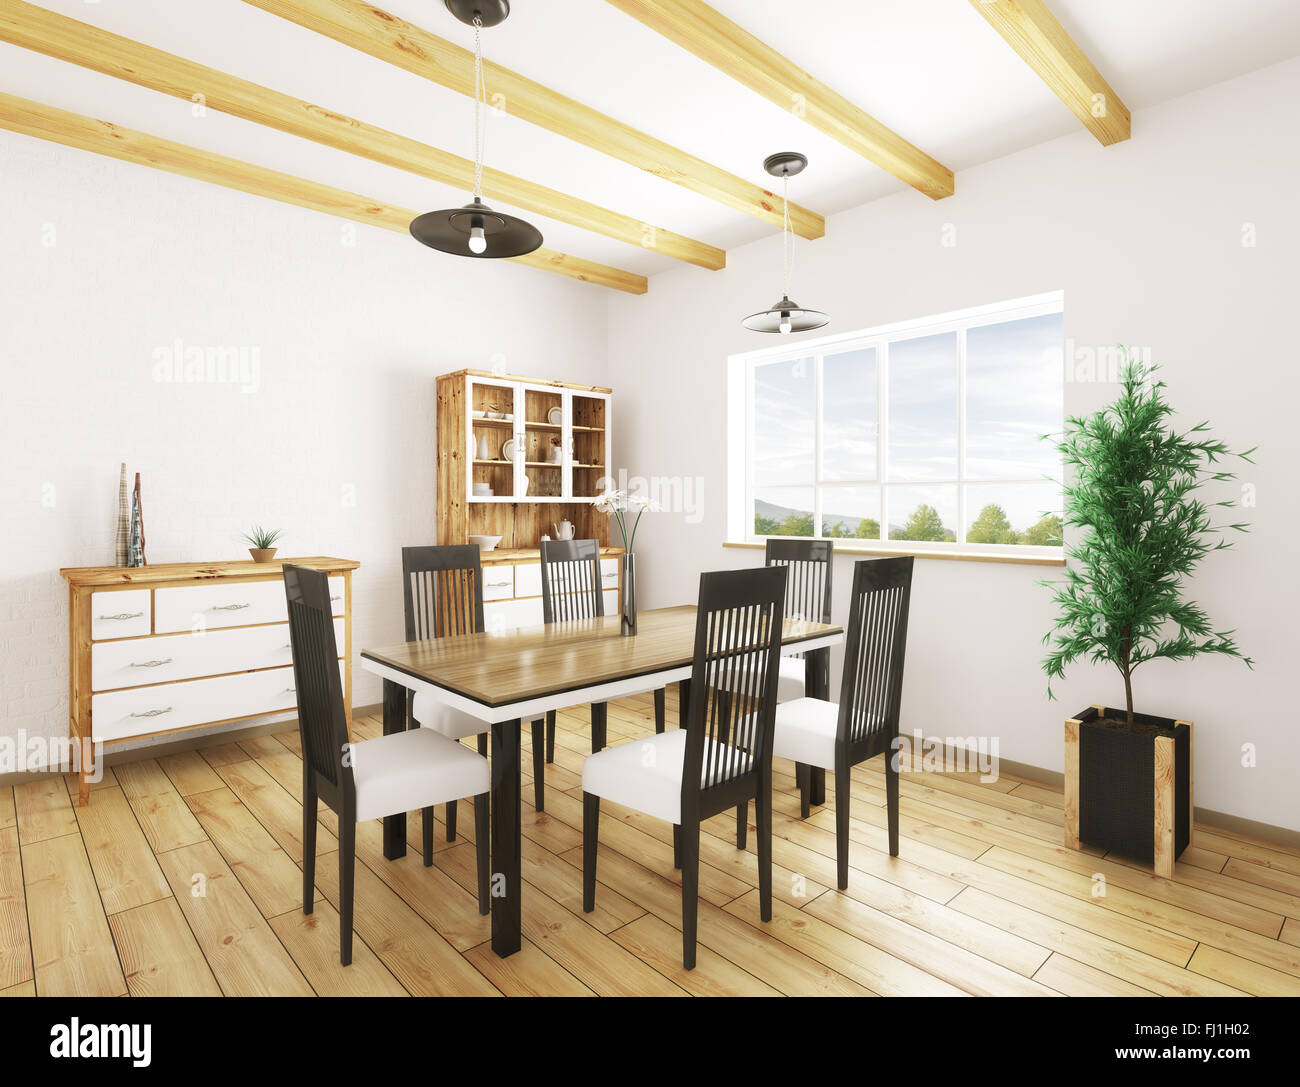 Classic interior of dining room 3d rendering Stock Photo